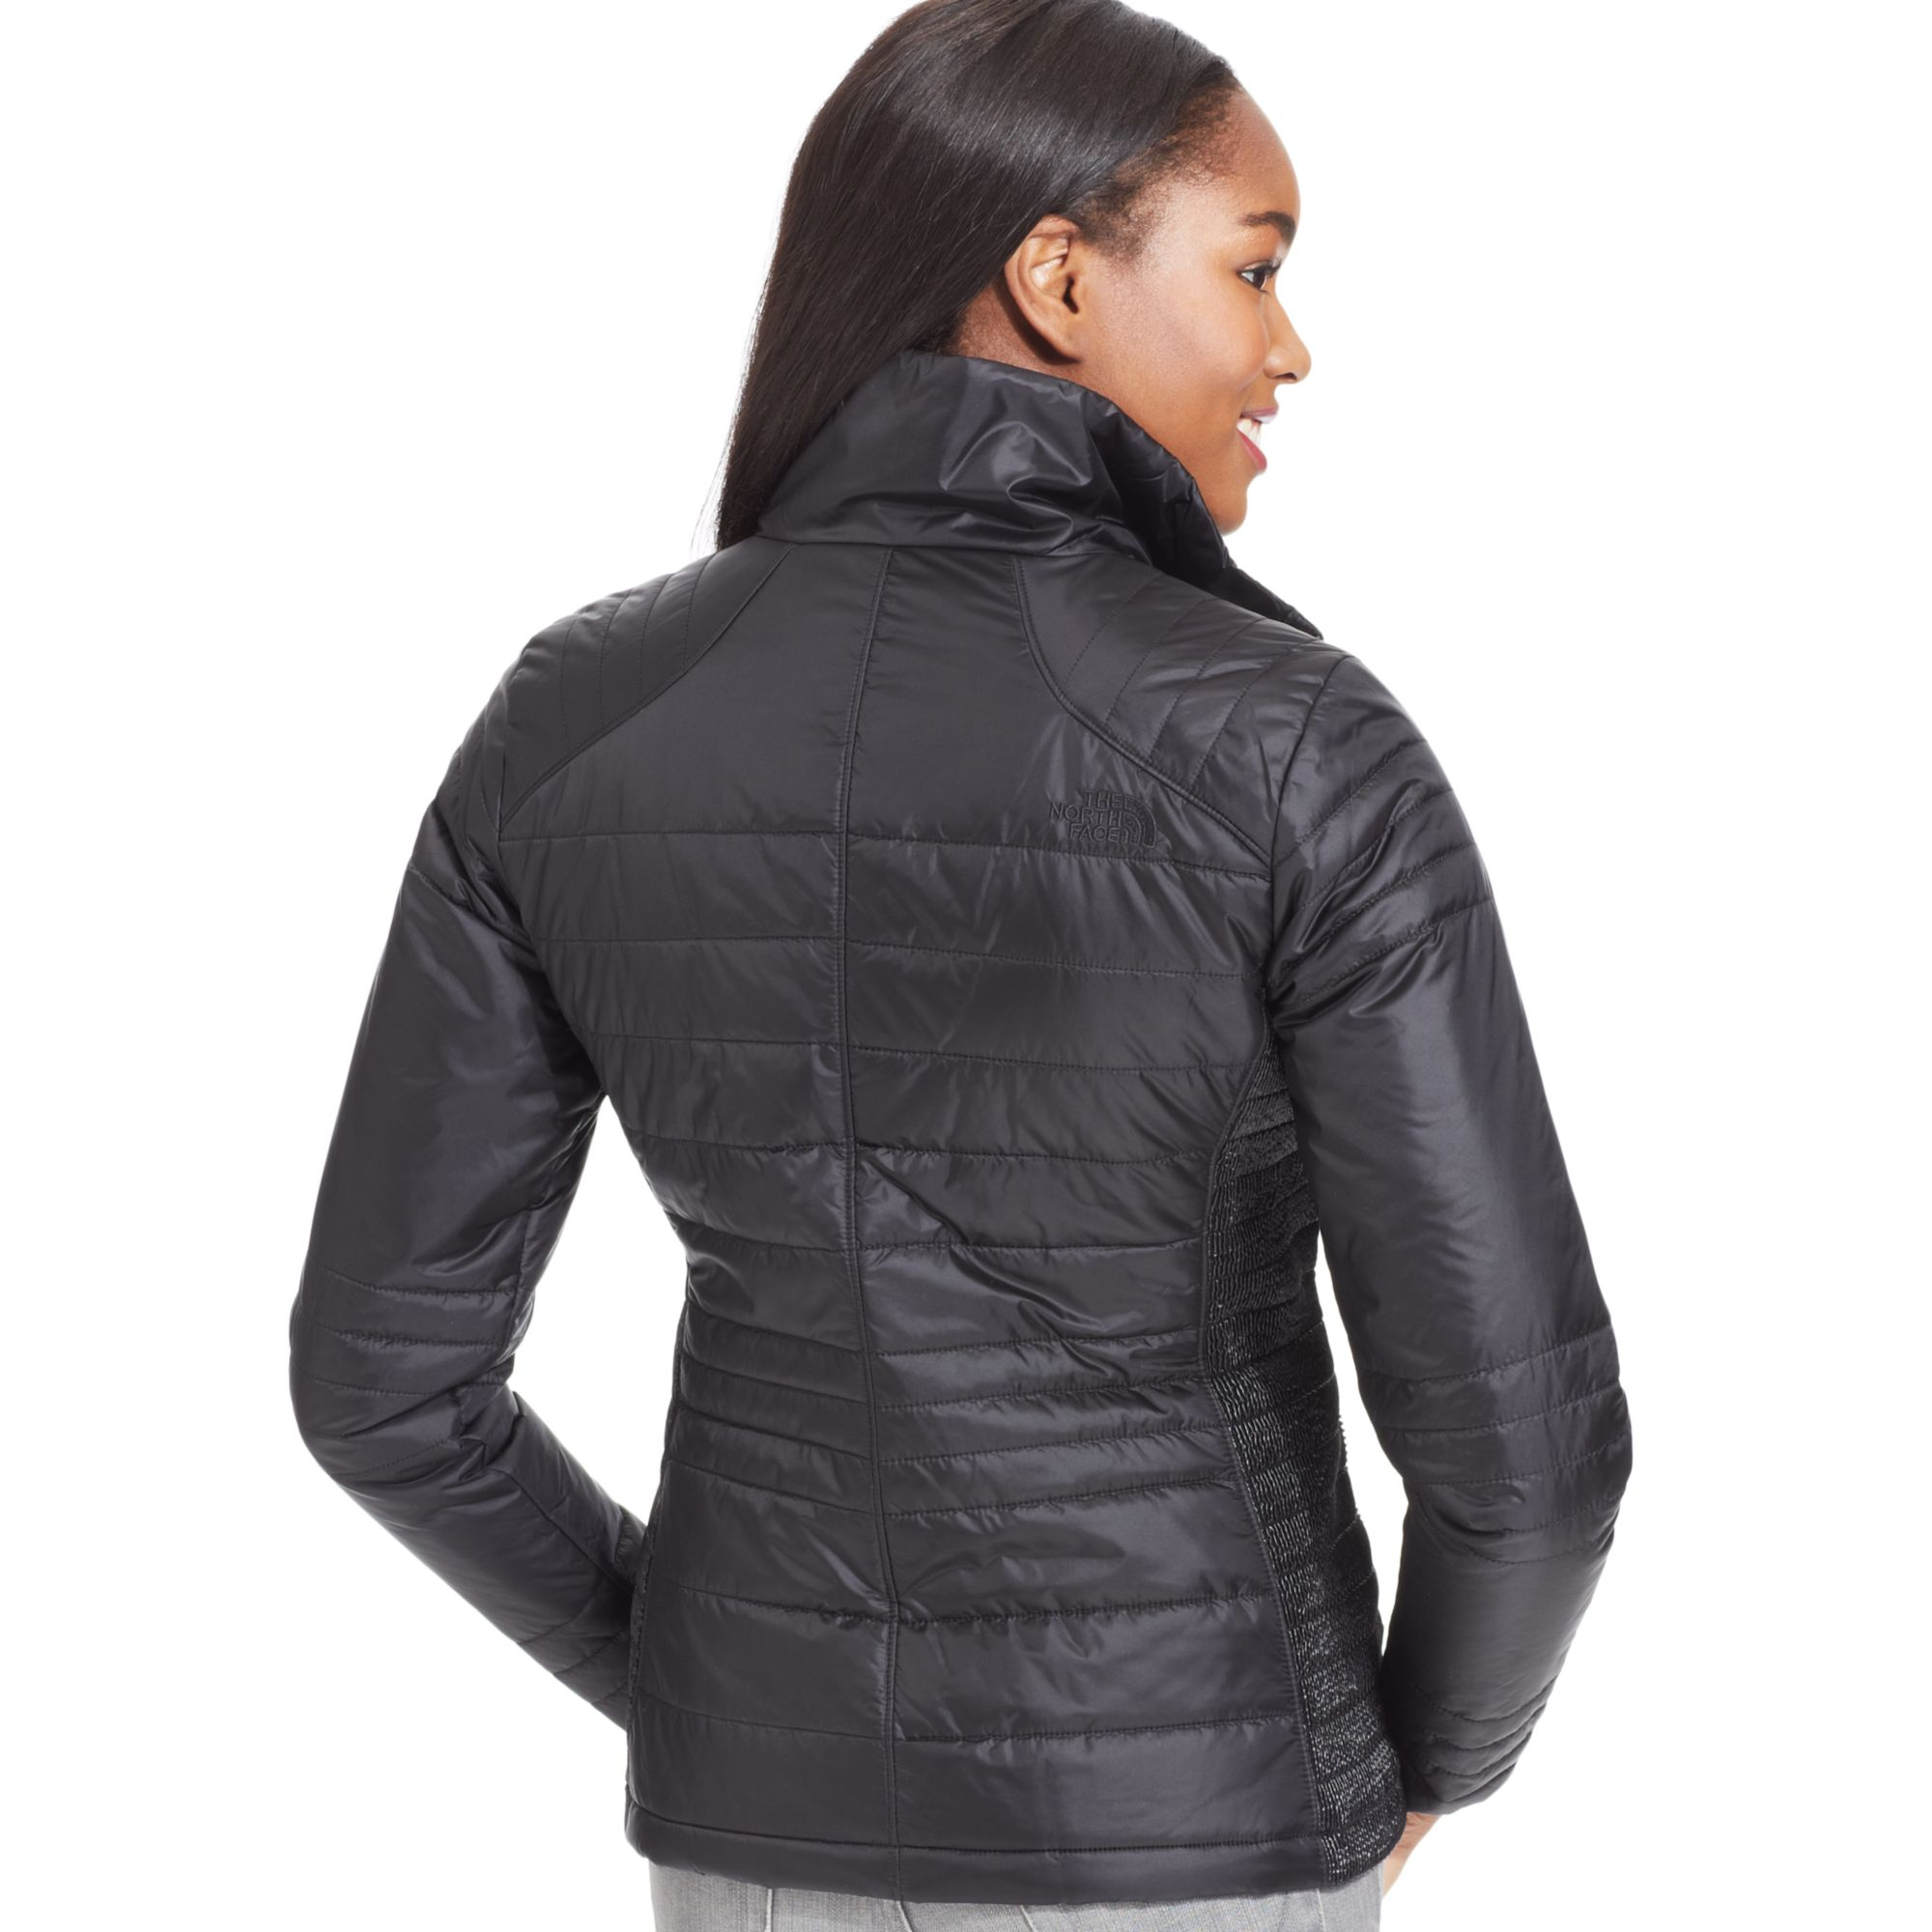 Lyst - The North Face Aleycia Puffer Jacket in Black